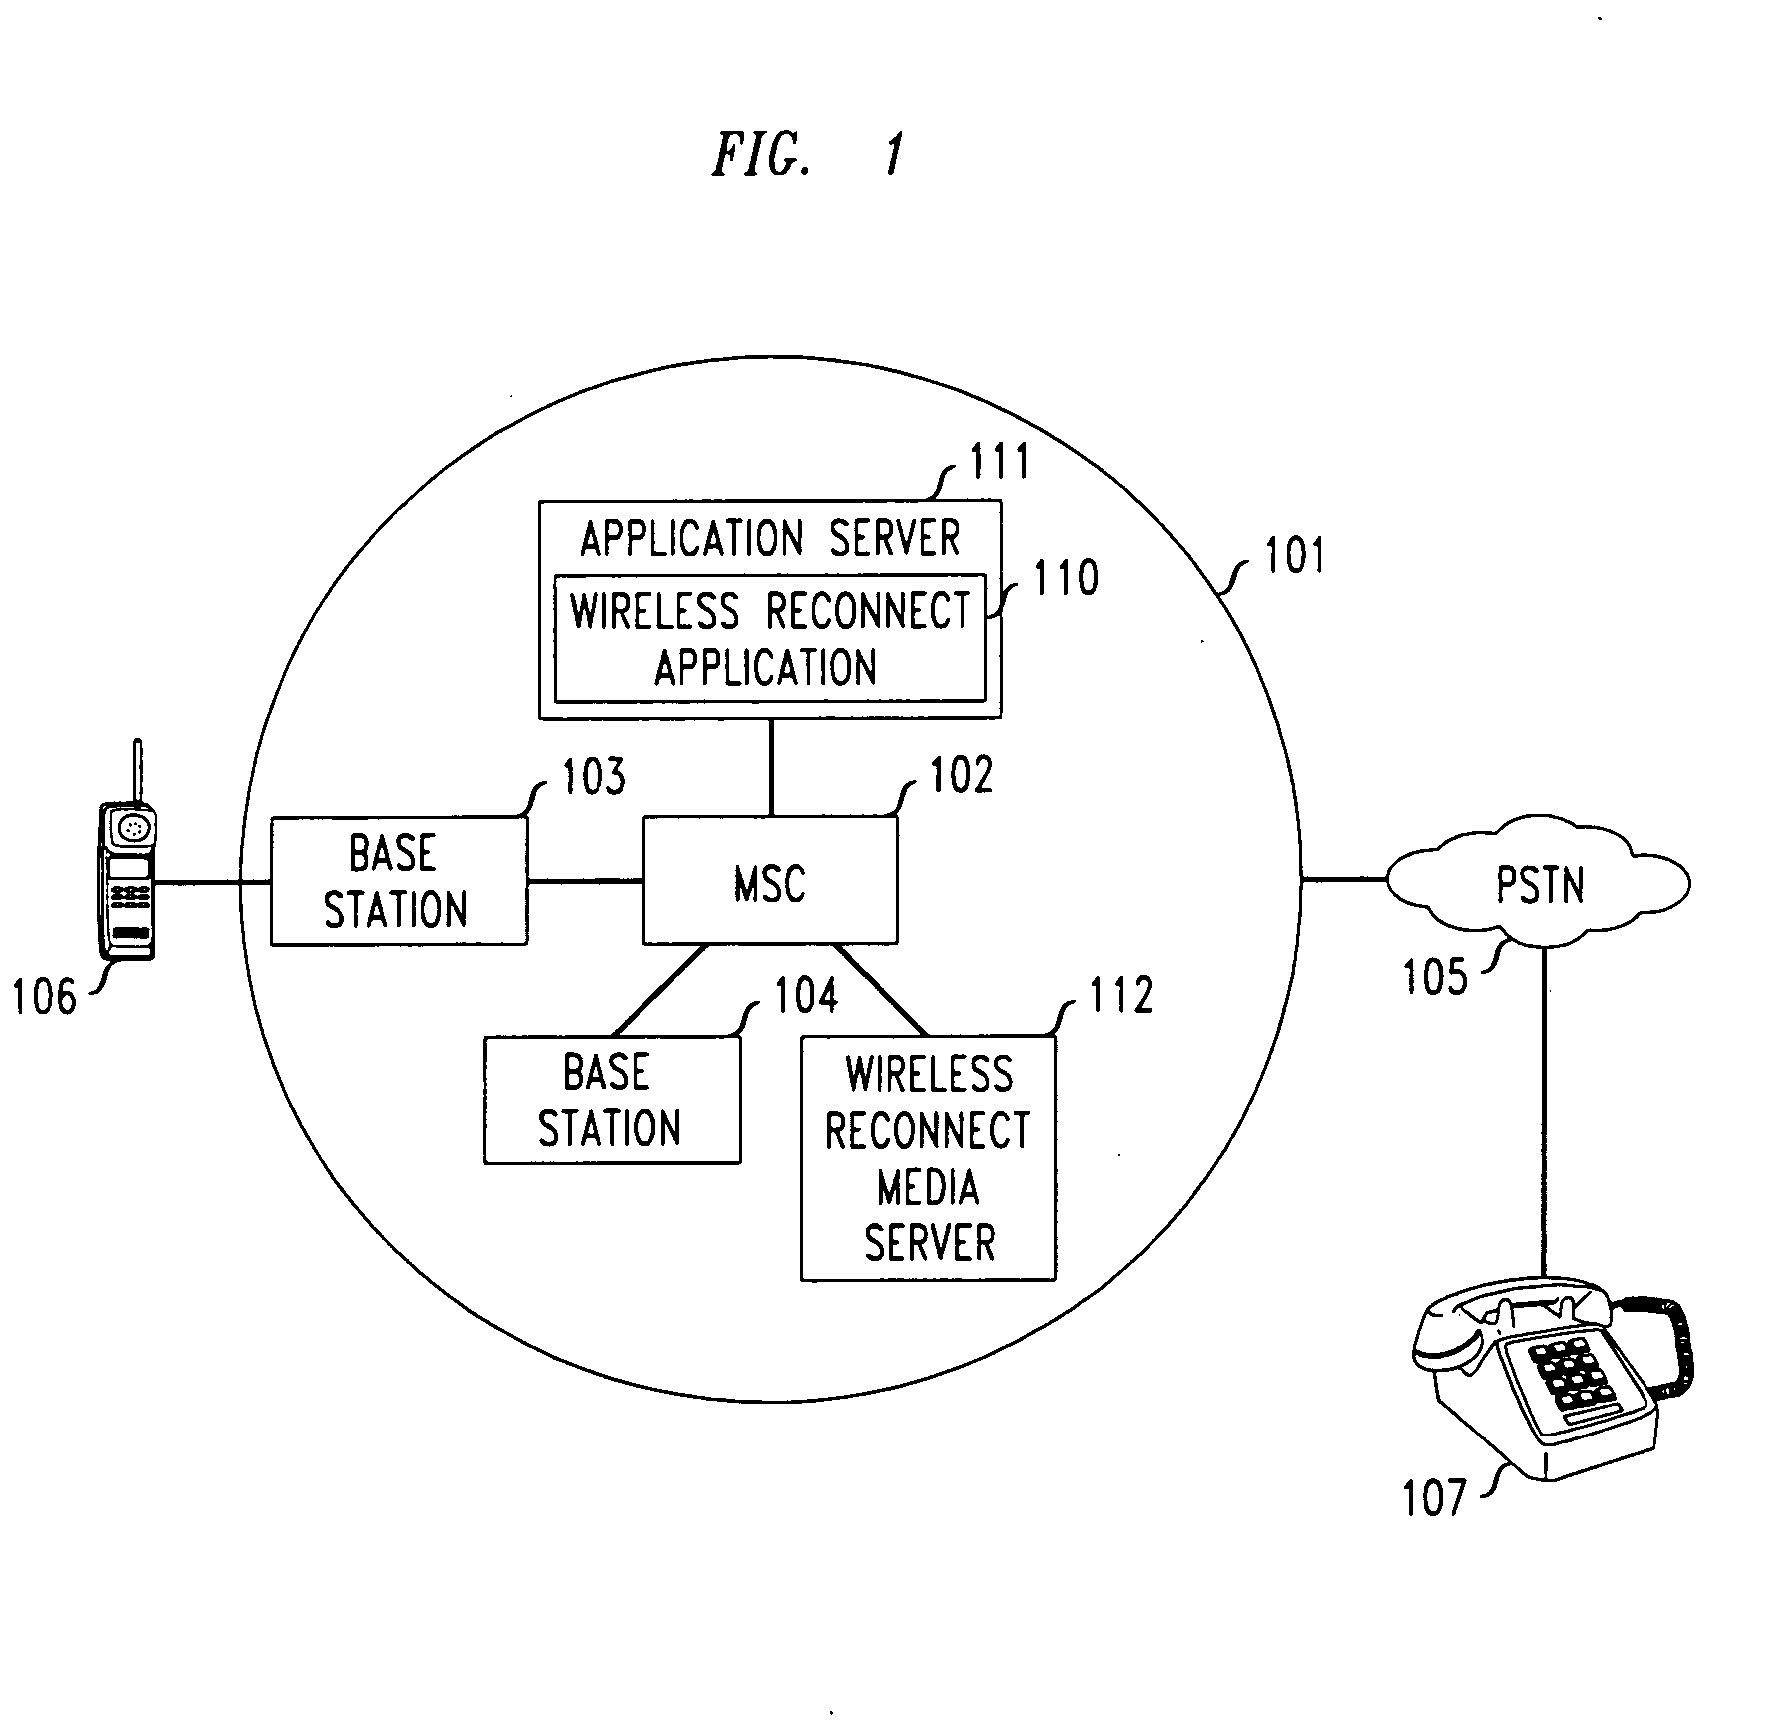 Method and apparatus for reconnecting dropped wireless calls